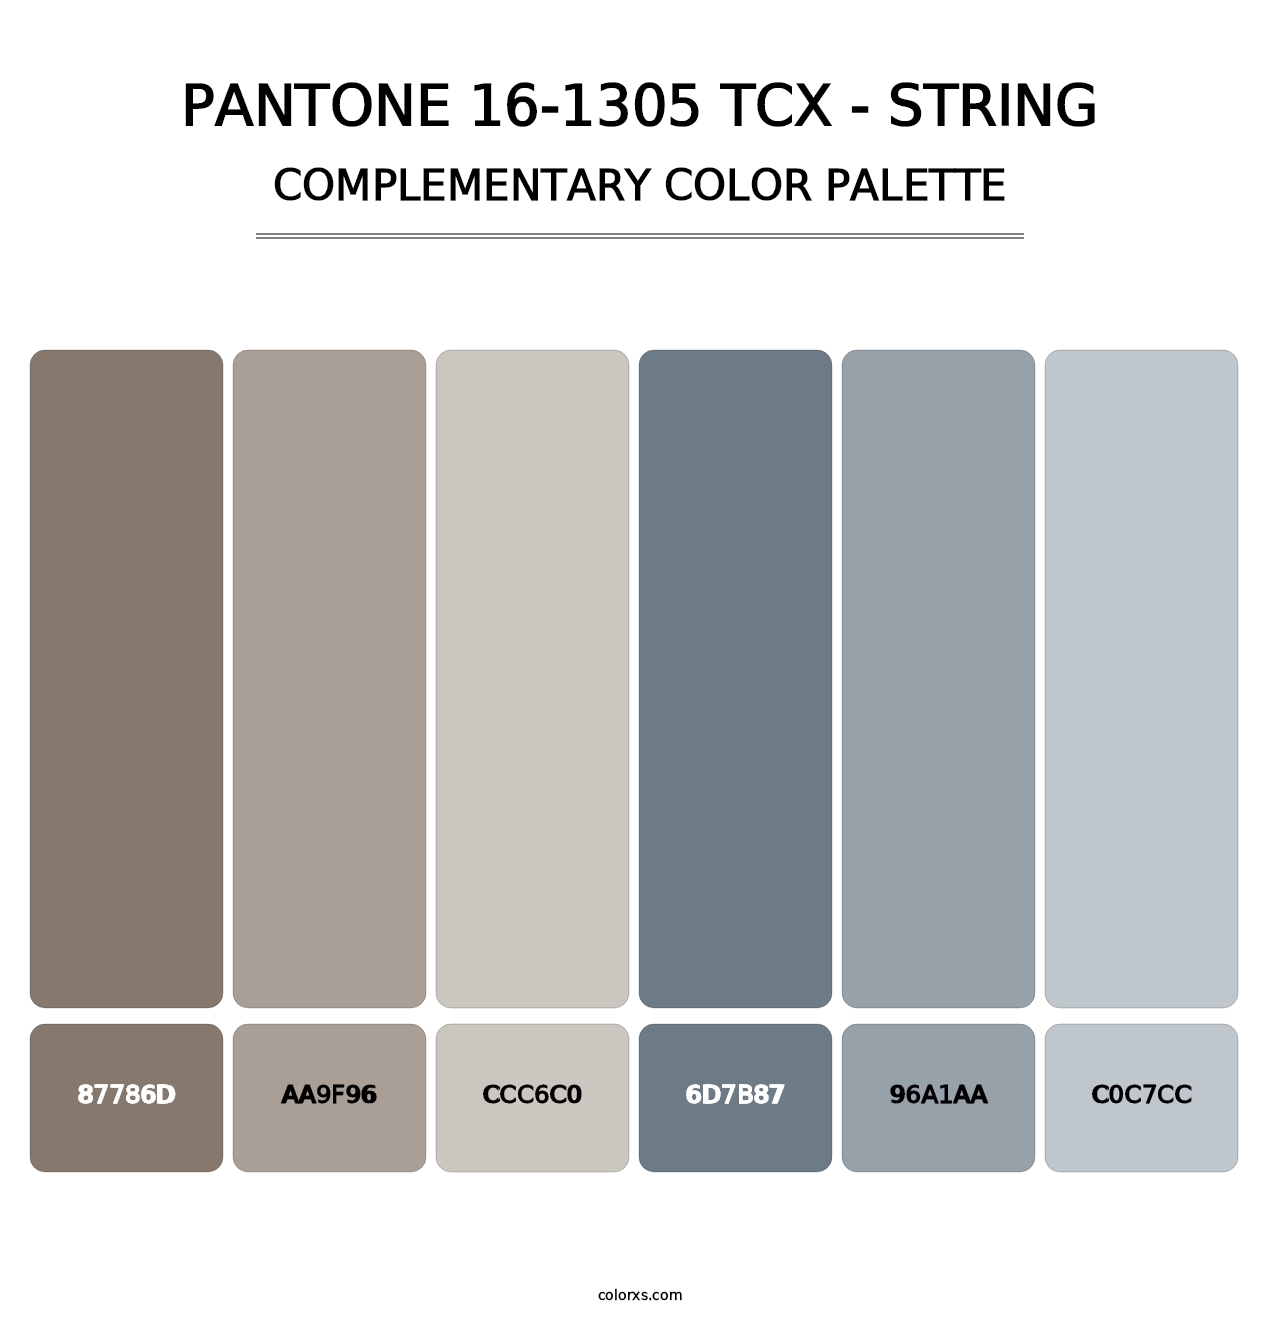 PANTONE 16-1305 TCX - String - Complementary Color Palette